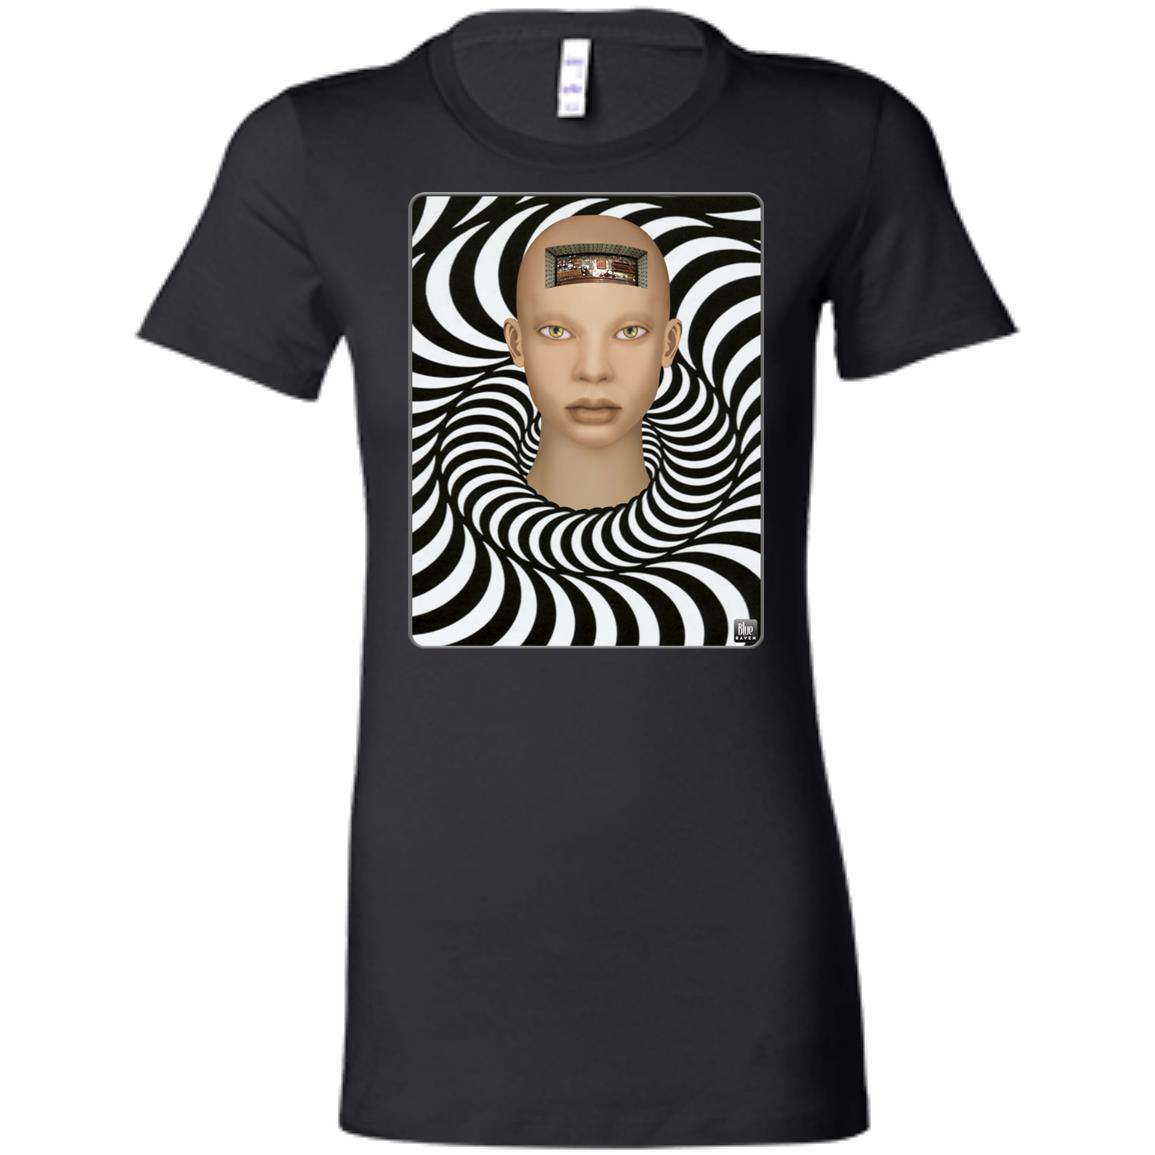 COMPUTERIZED - Women's Fitted T-Shirt